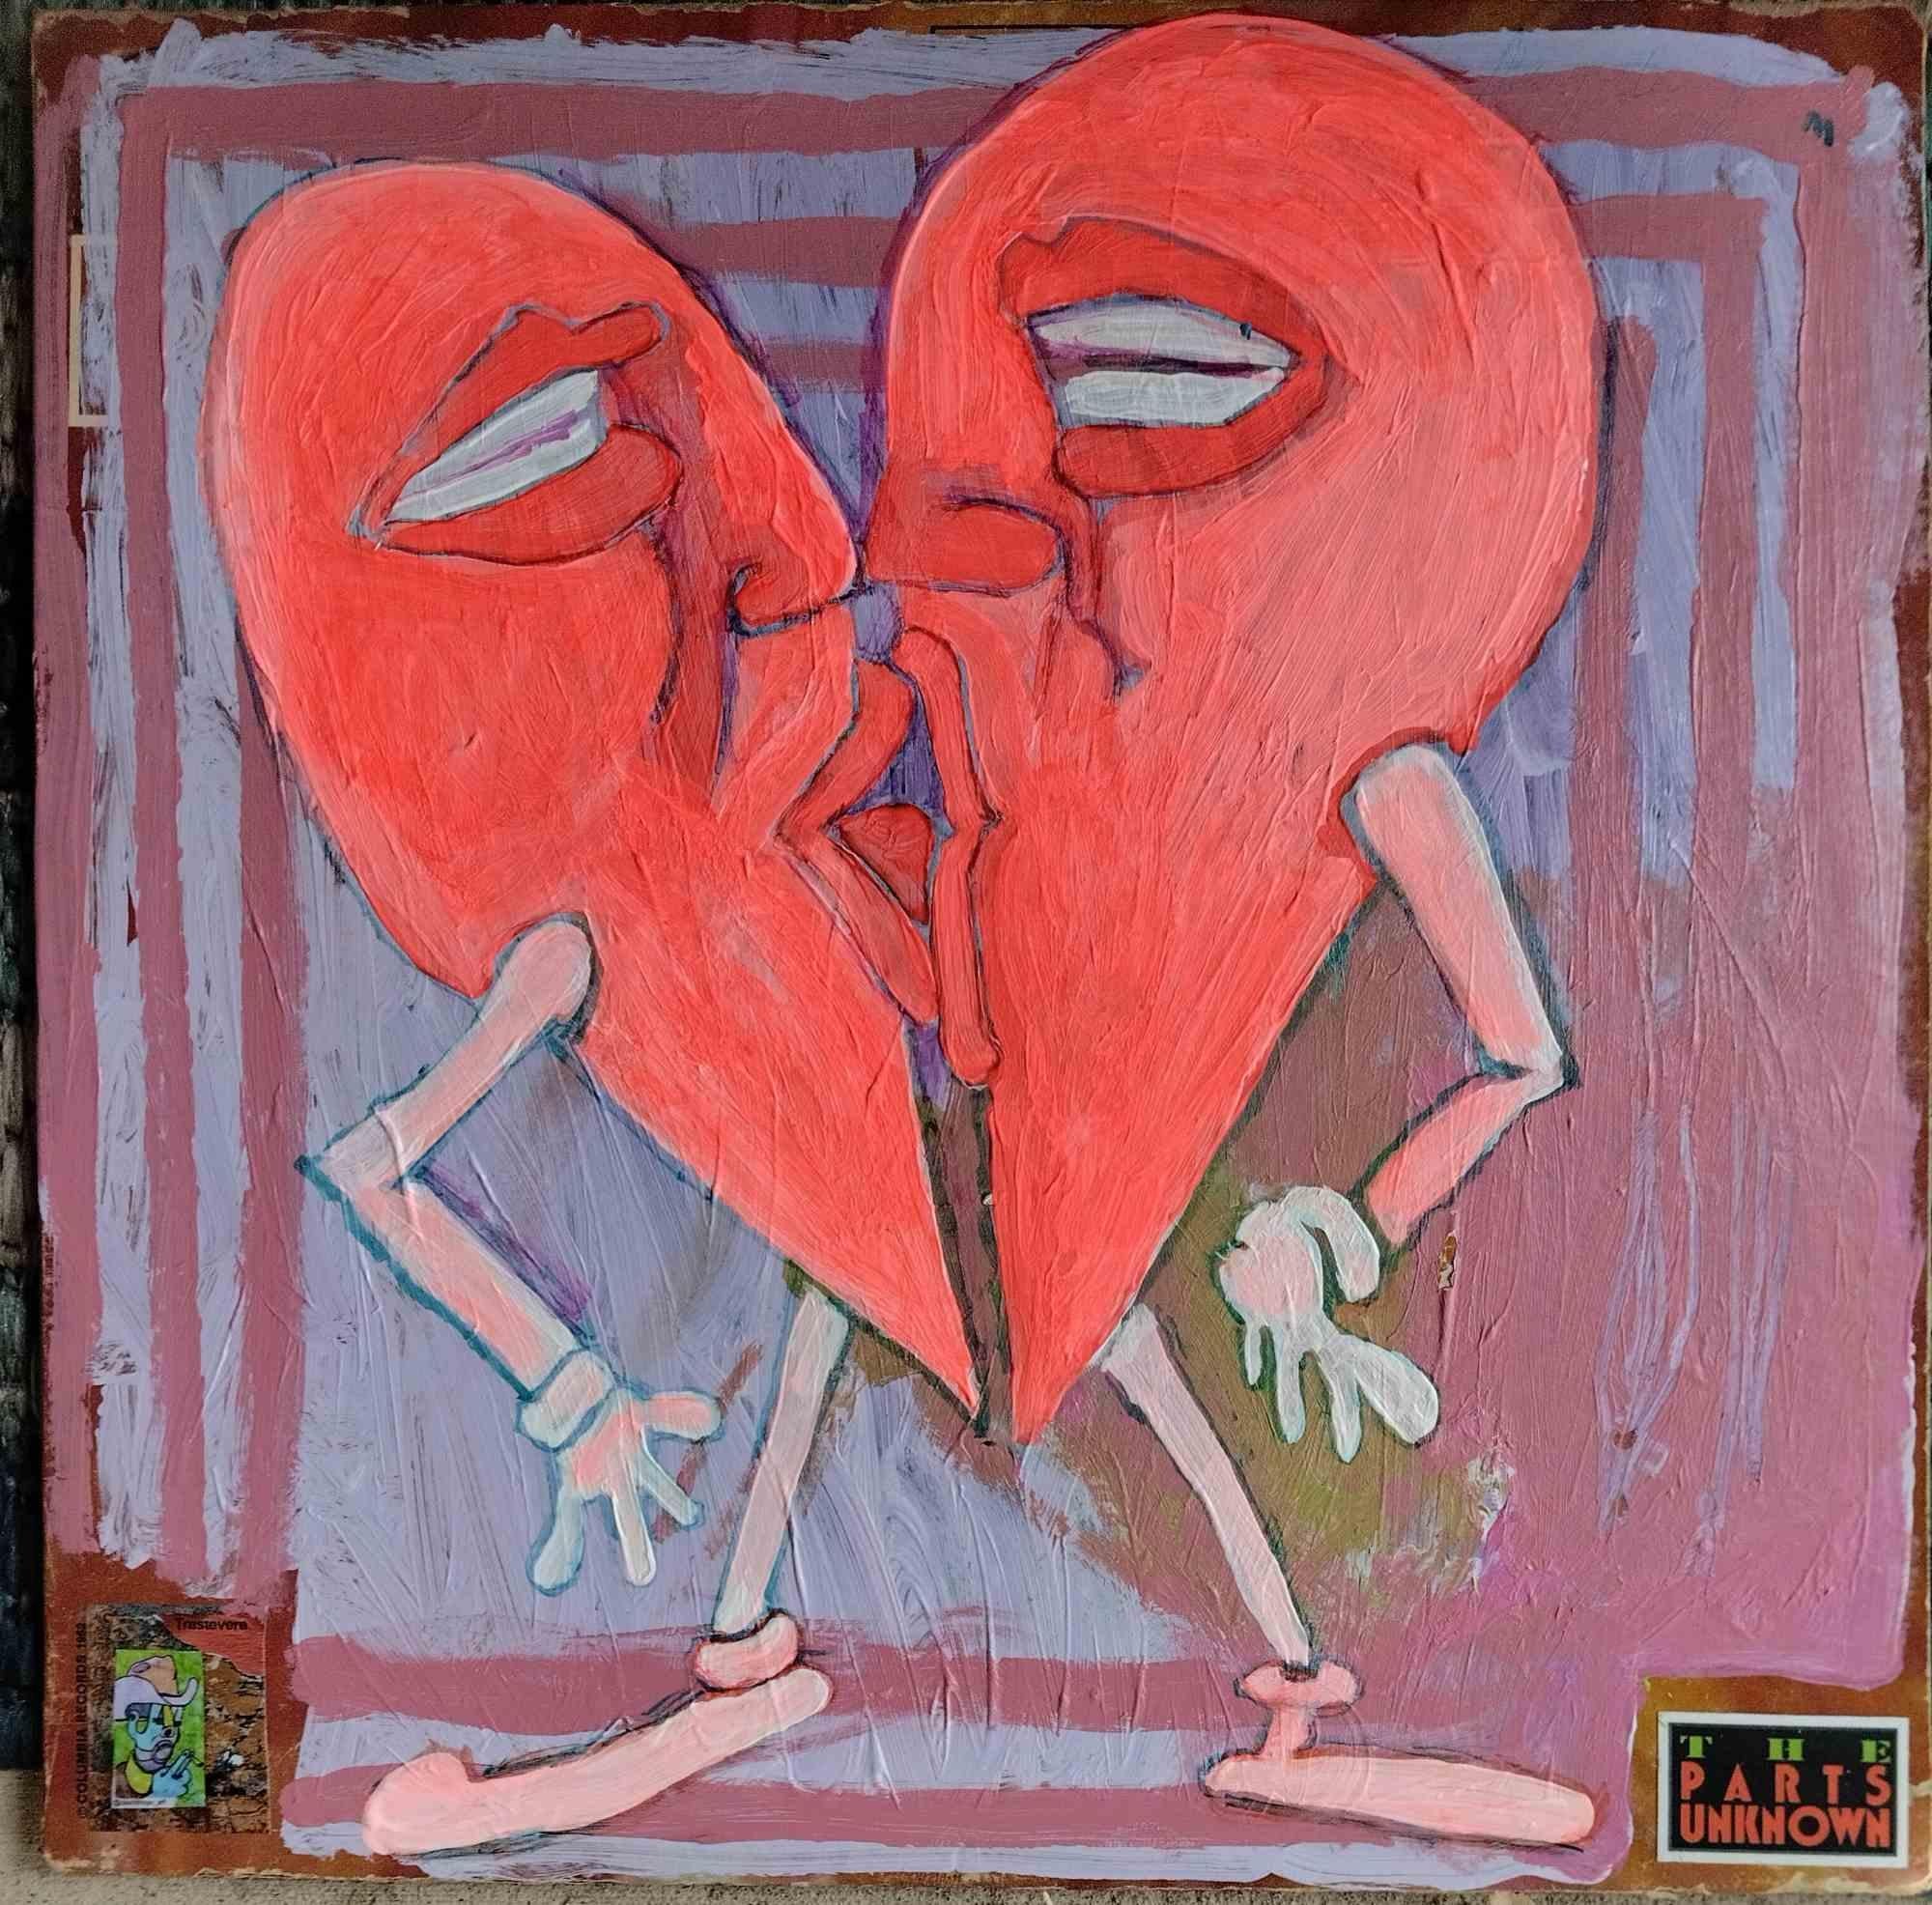 Heart Attracts (frame 03) is an acrylic painting on recycled record cover featured in Dax Norman's "Cinema Graffiti" NFT collection. Hand-signed.

The works in this collection of paintings blur the lines between the physical and digital, and subvert